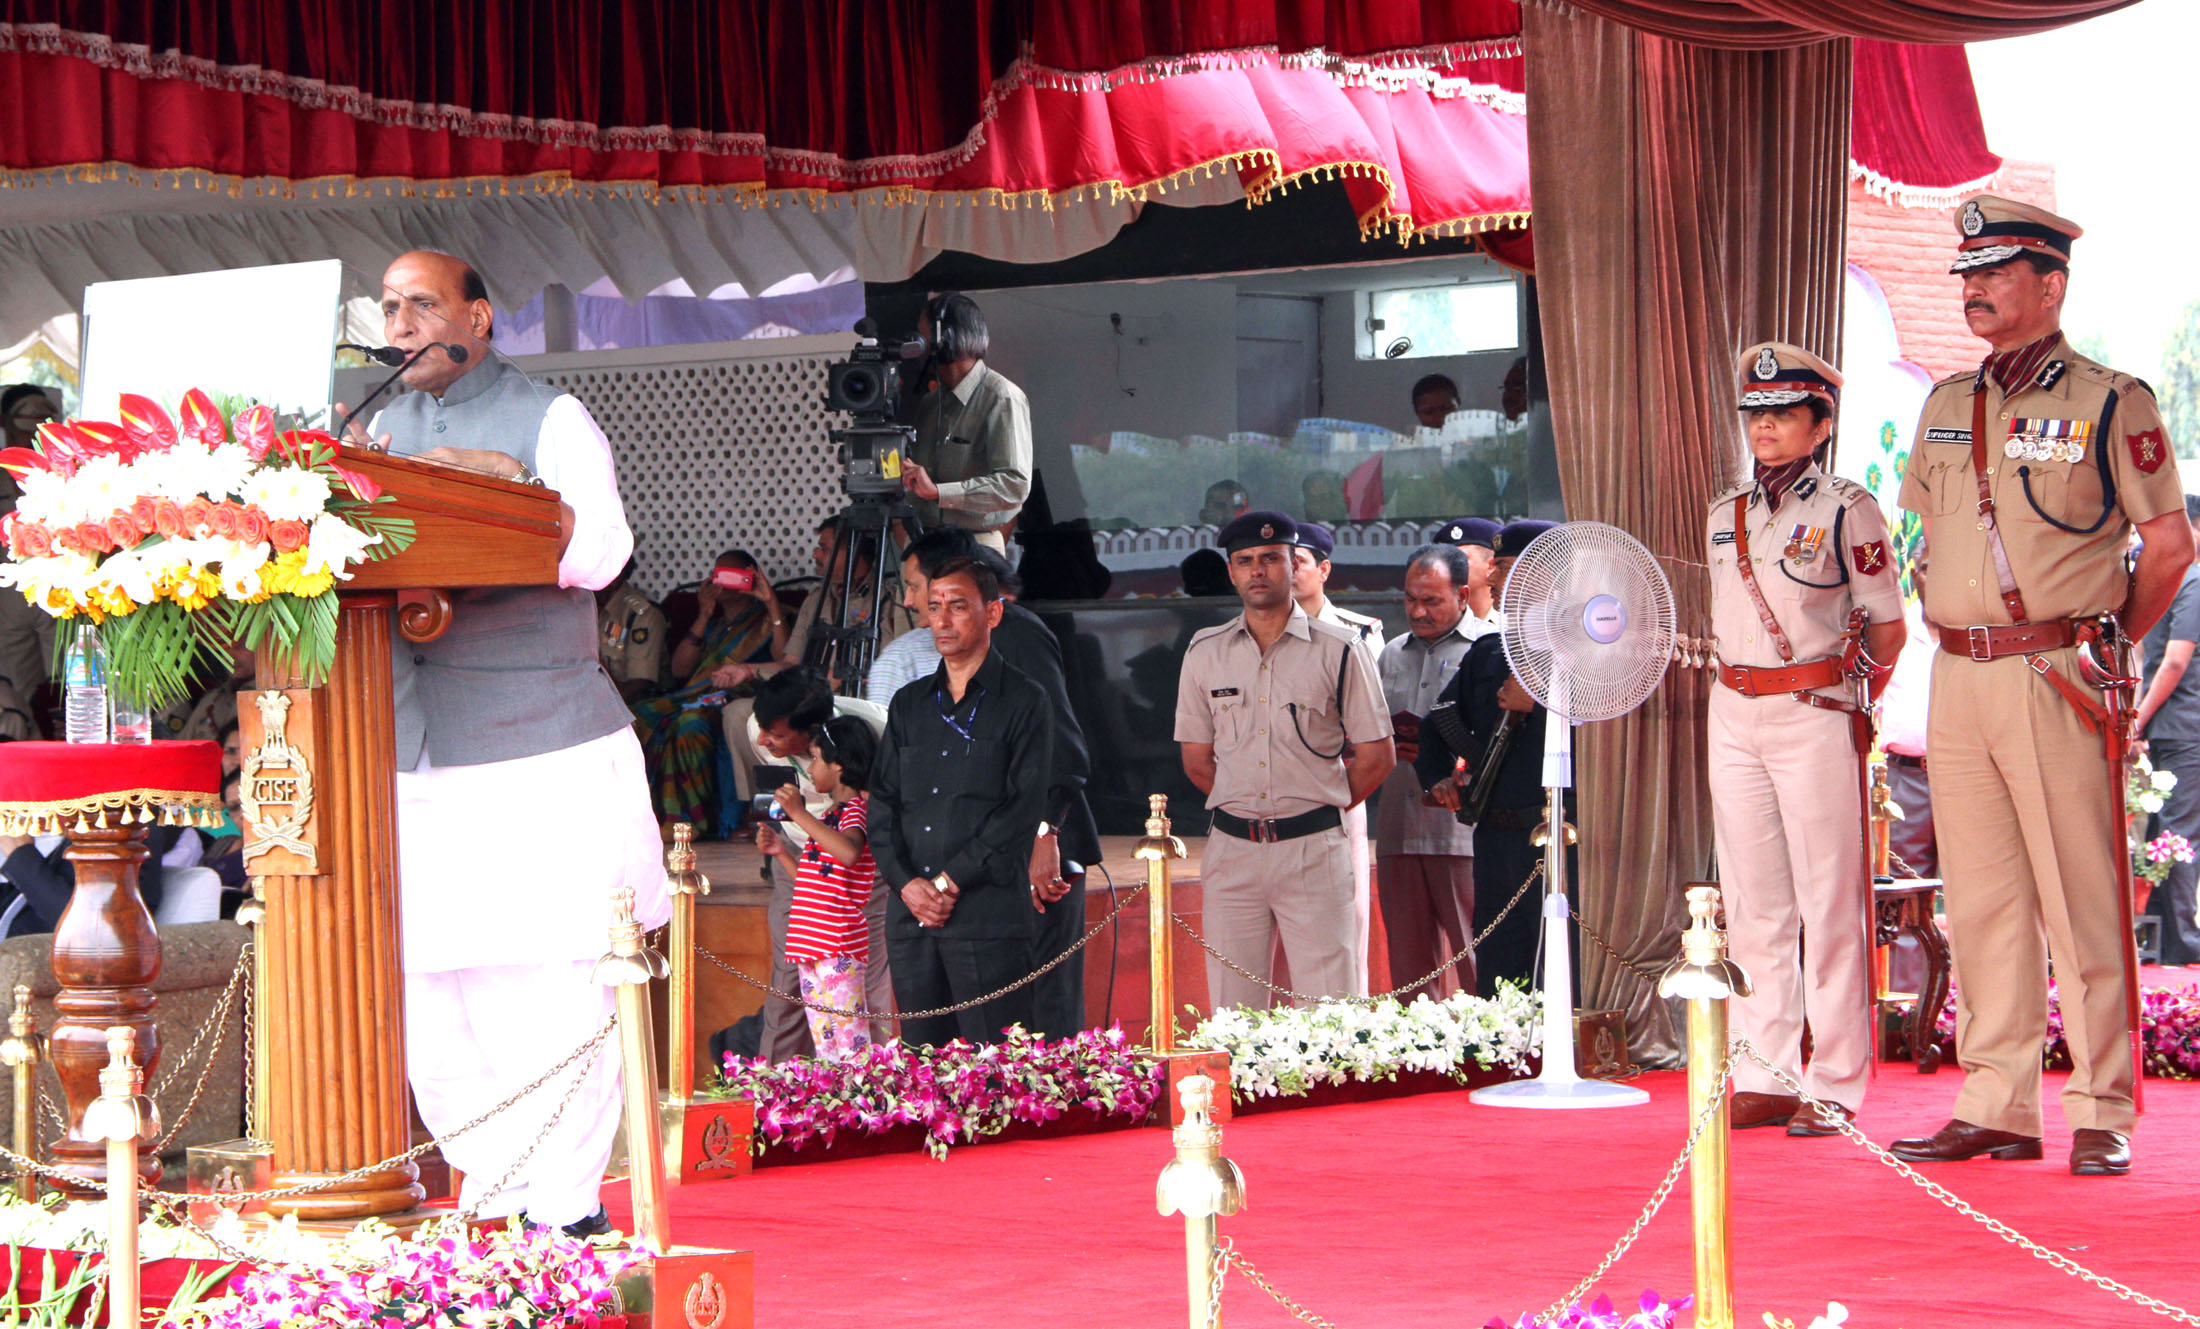 The Union Home Minister, Shri Rajnath Singh addressing at the 47th Raising Day function of the CISF, in Ghaziabad on Friday, March 11, 2016.  The Director General, CISF, Shri Surender Singh is also seen.